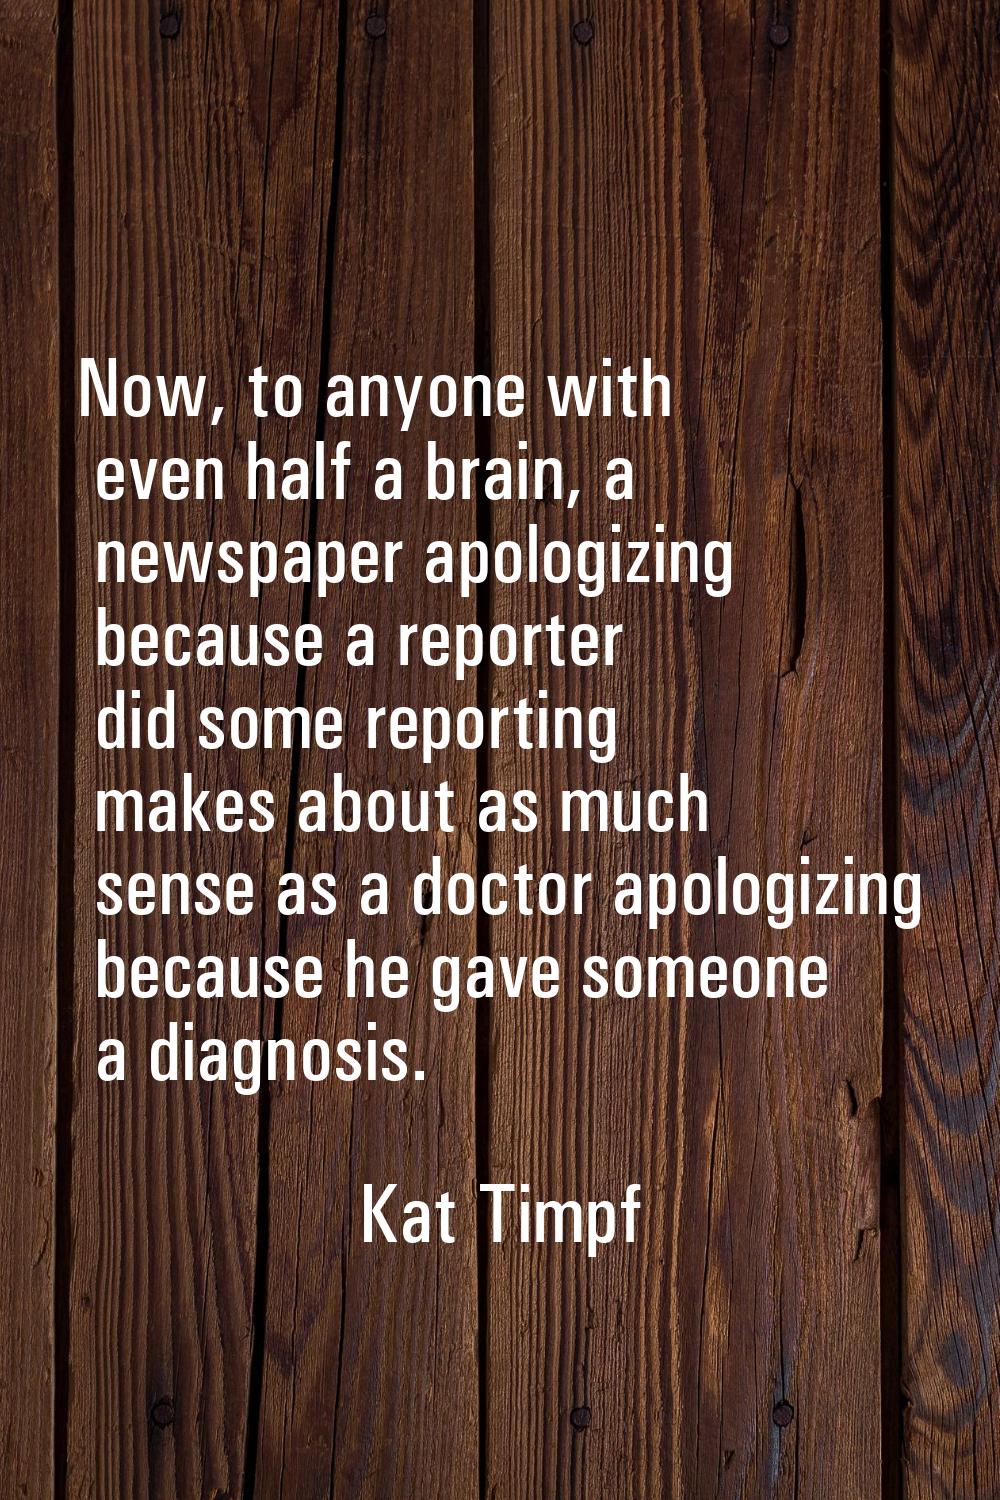 Now, to anyone with even half a brain, a newspaper apologizing because a reporter did some reportin